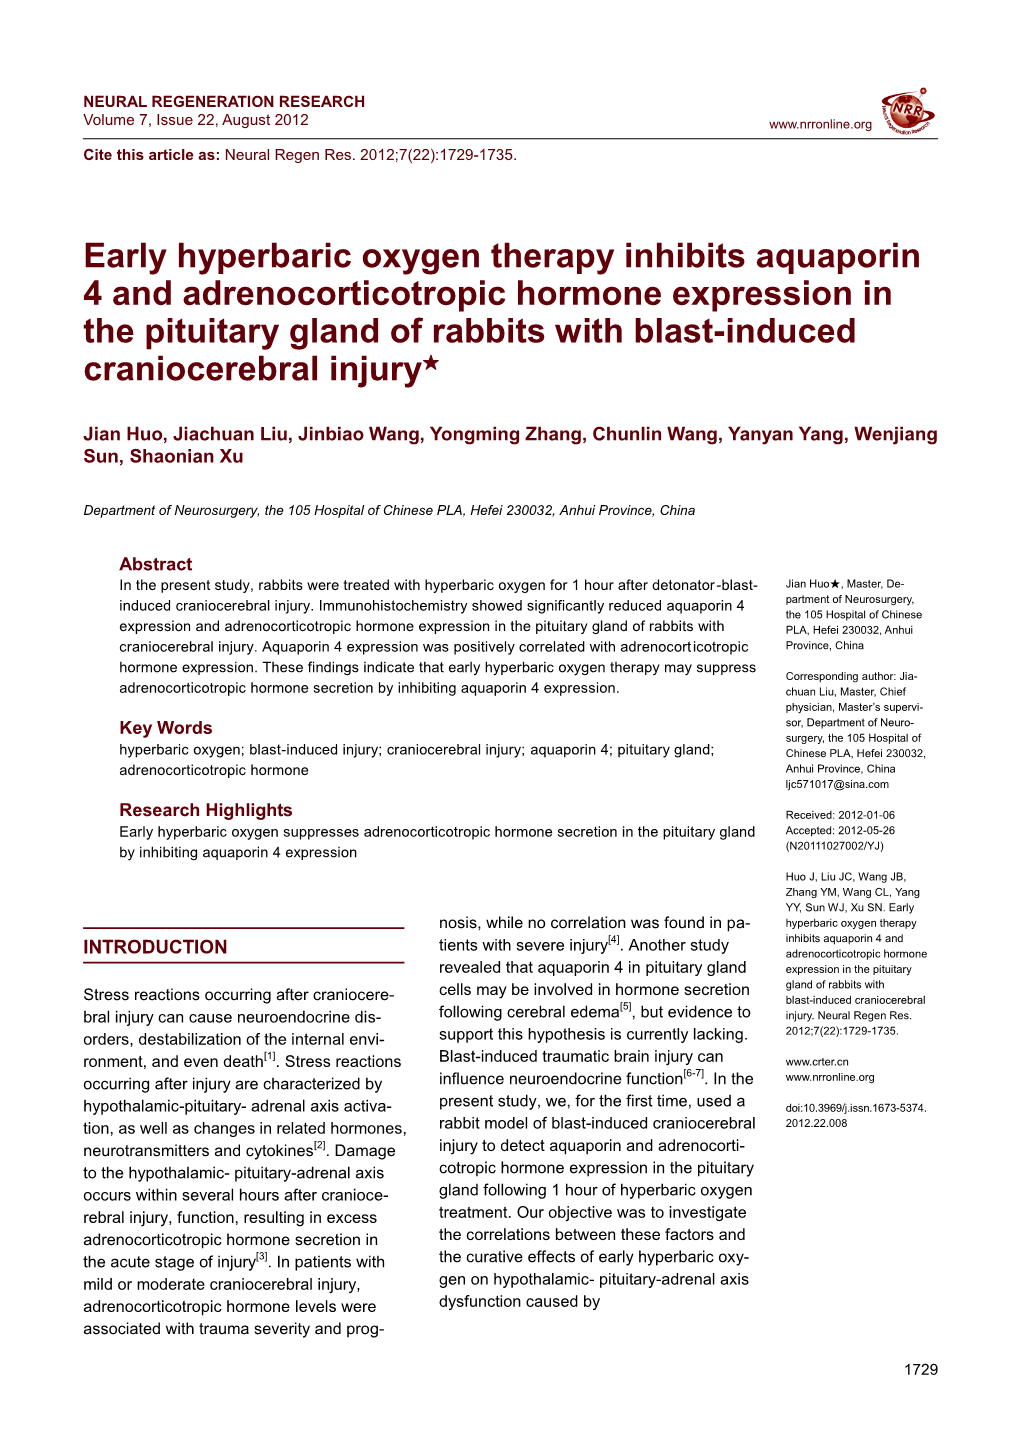 Early Hyperbaric Oxygen Therapy Inhibits Aquaporin 4